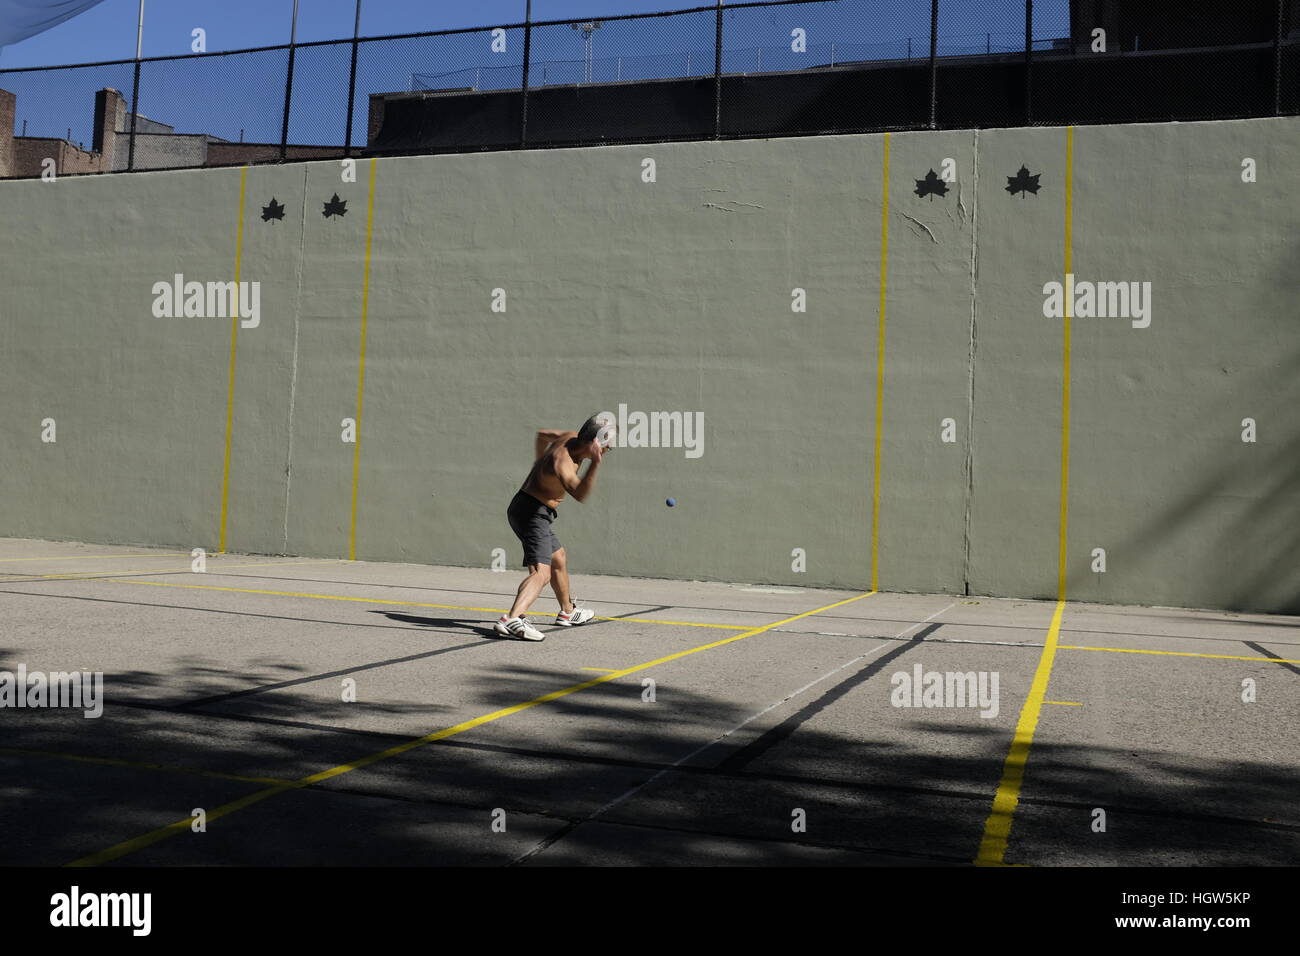 NEW YORK, NY:  A man plays hand ball at one of the many courts in downtown Manhattan. Stock Photo